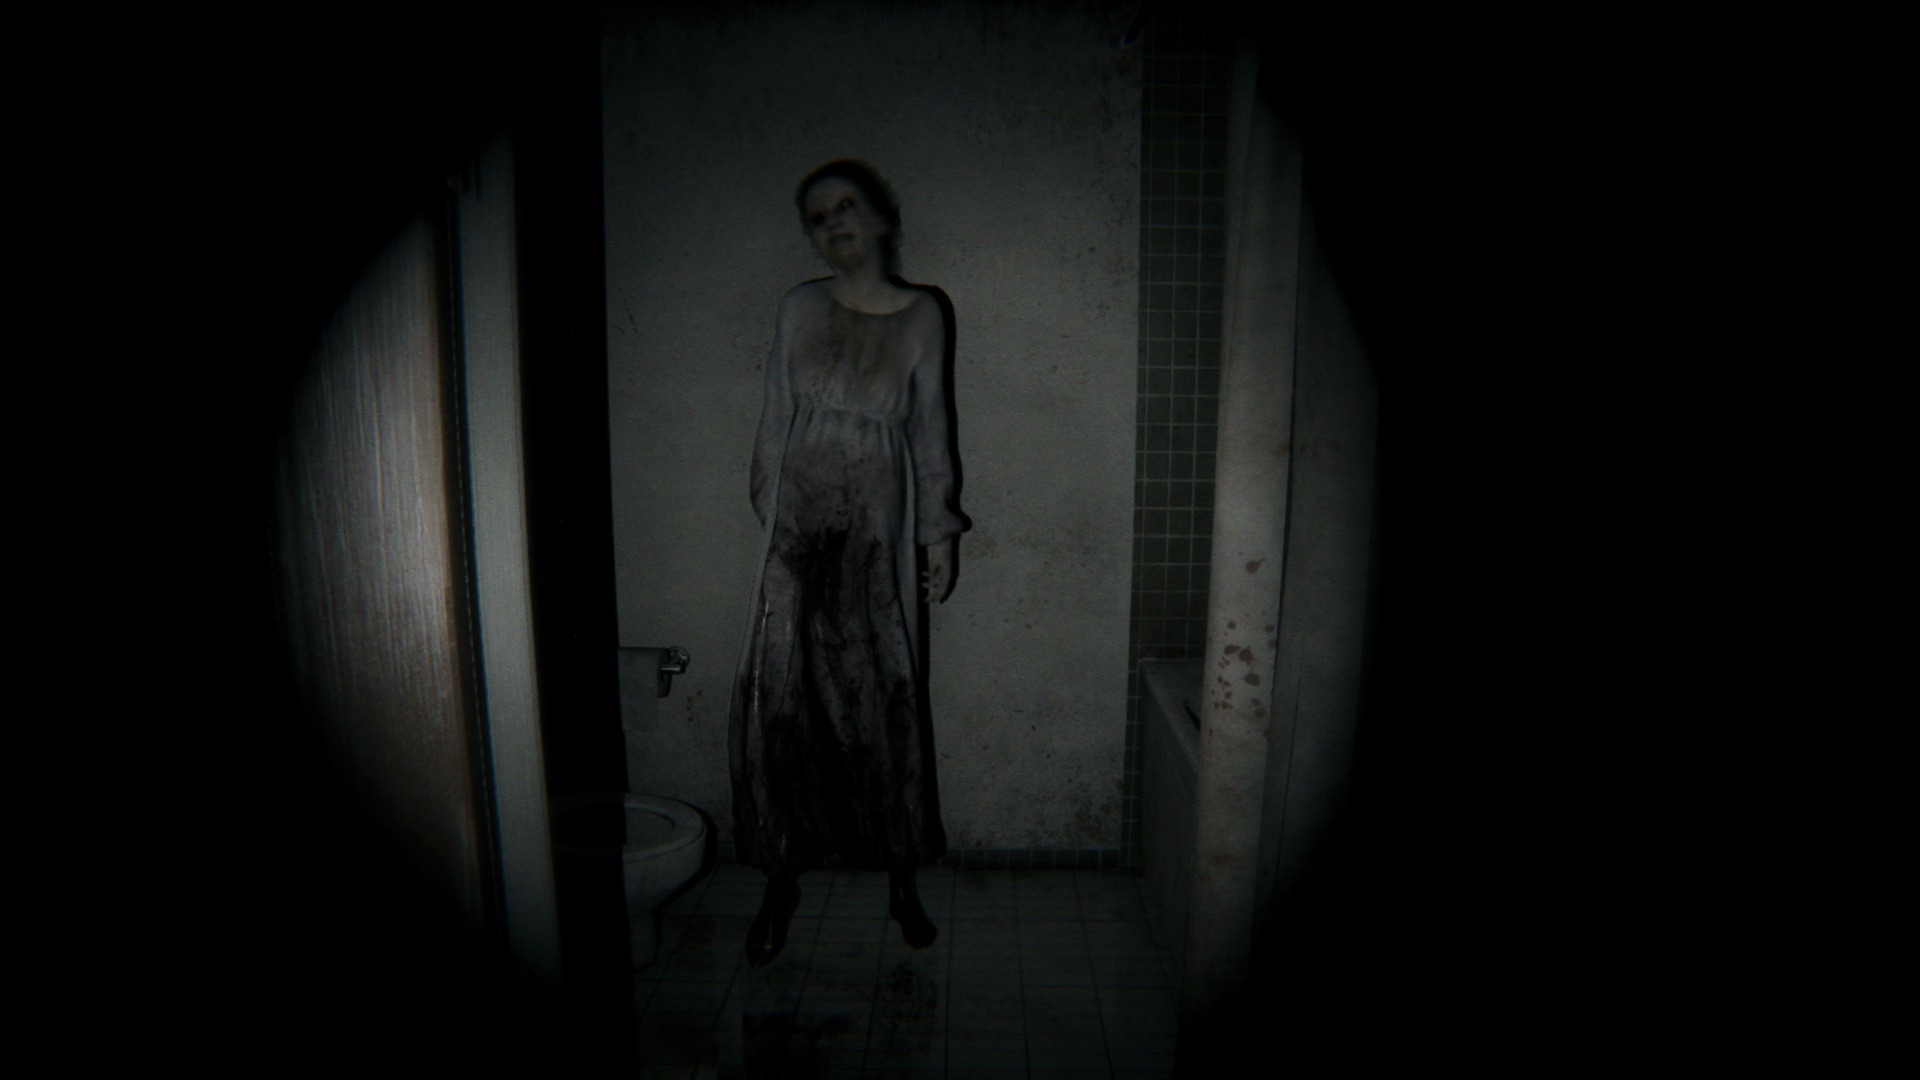 Silent Hills P.T. Demo Walkthrough will scare you :) - Gaming Central